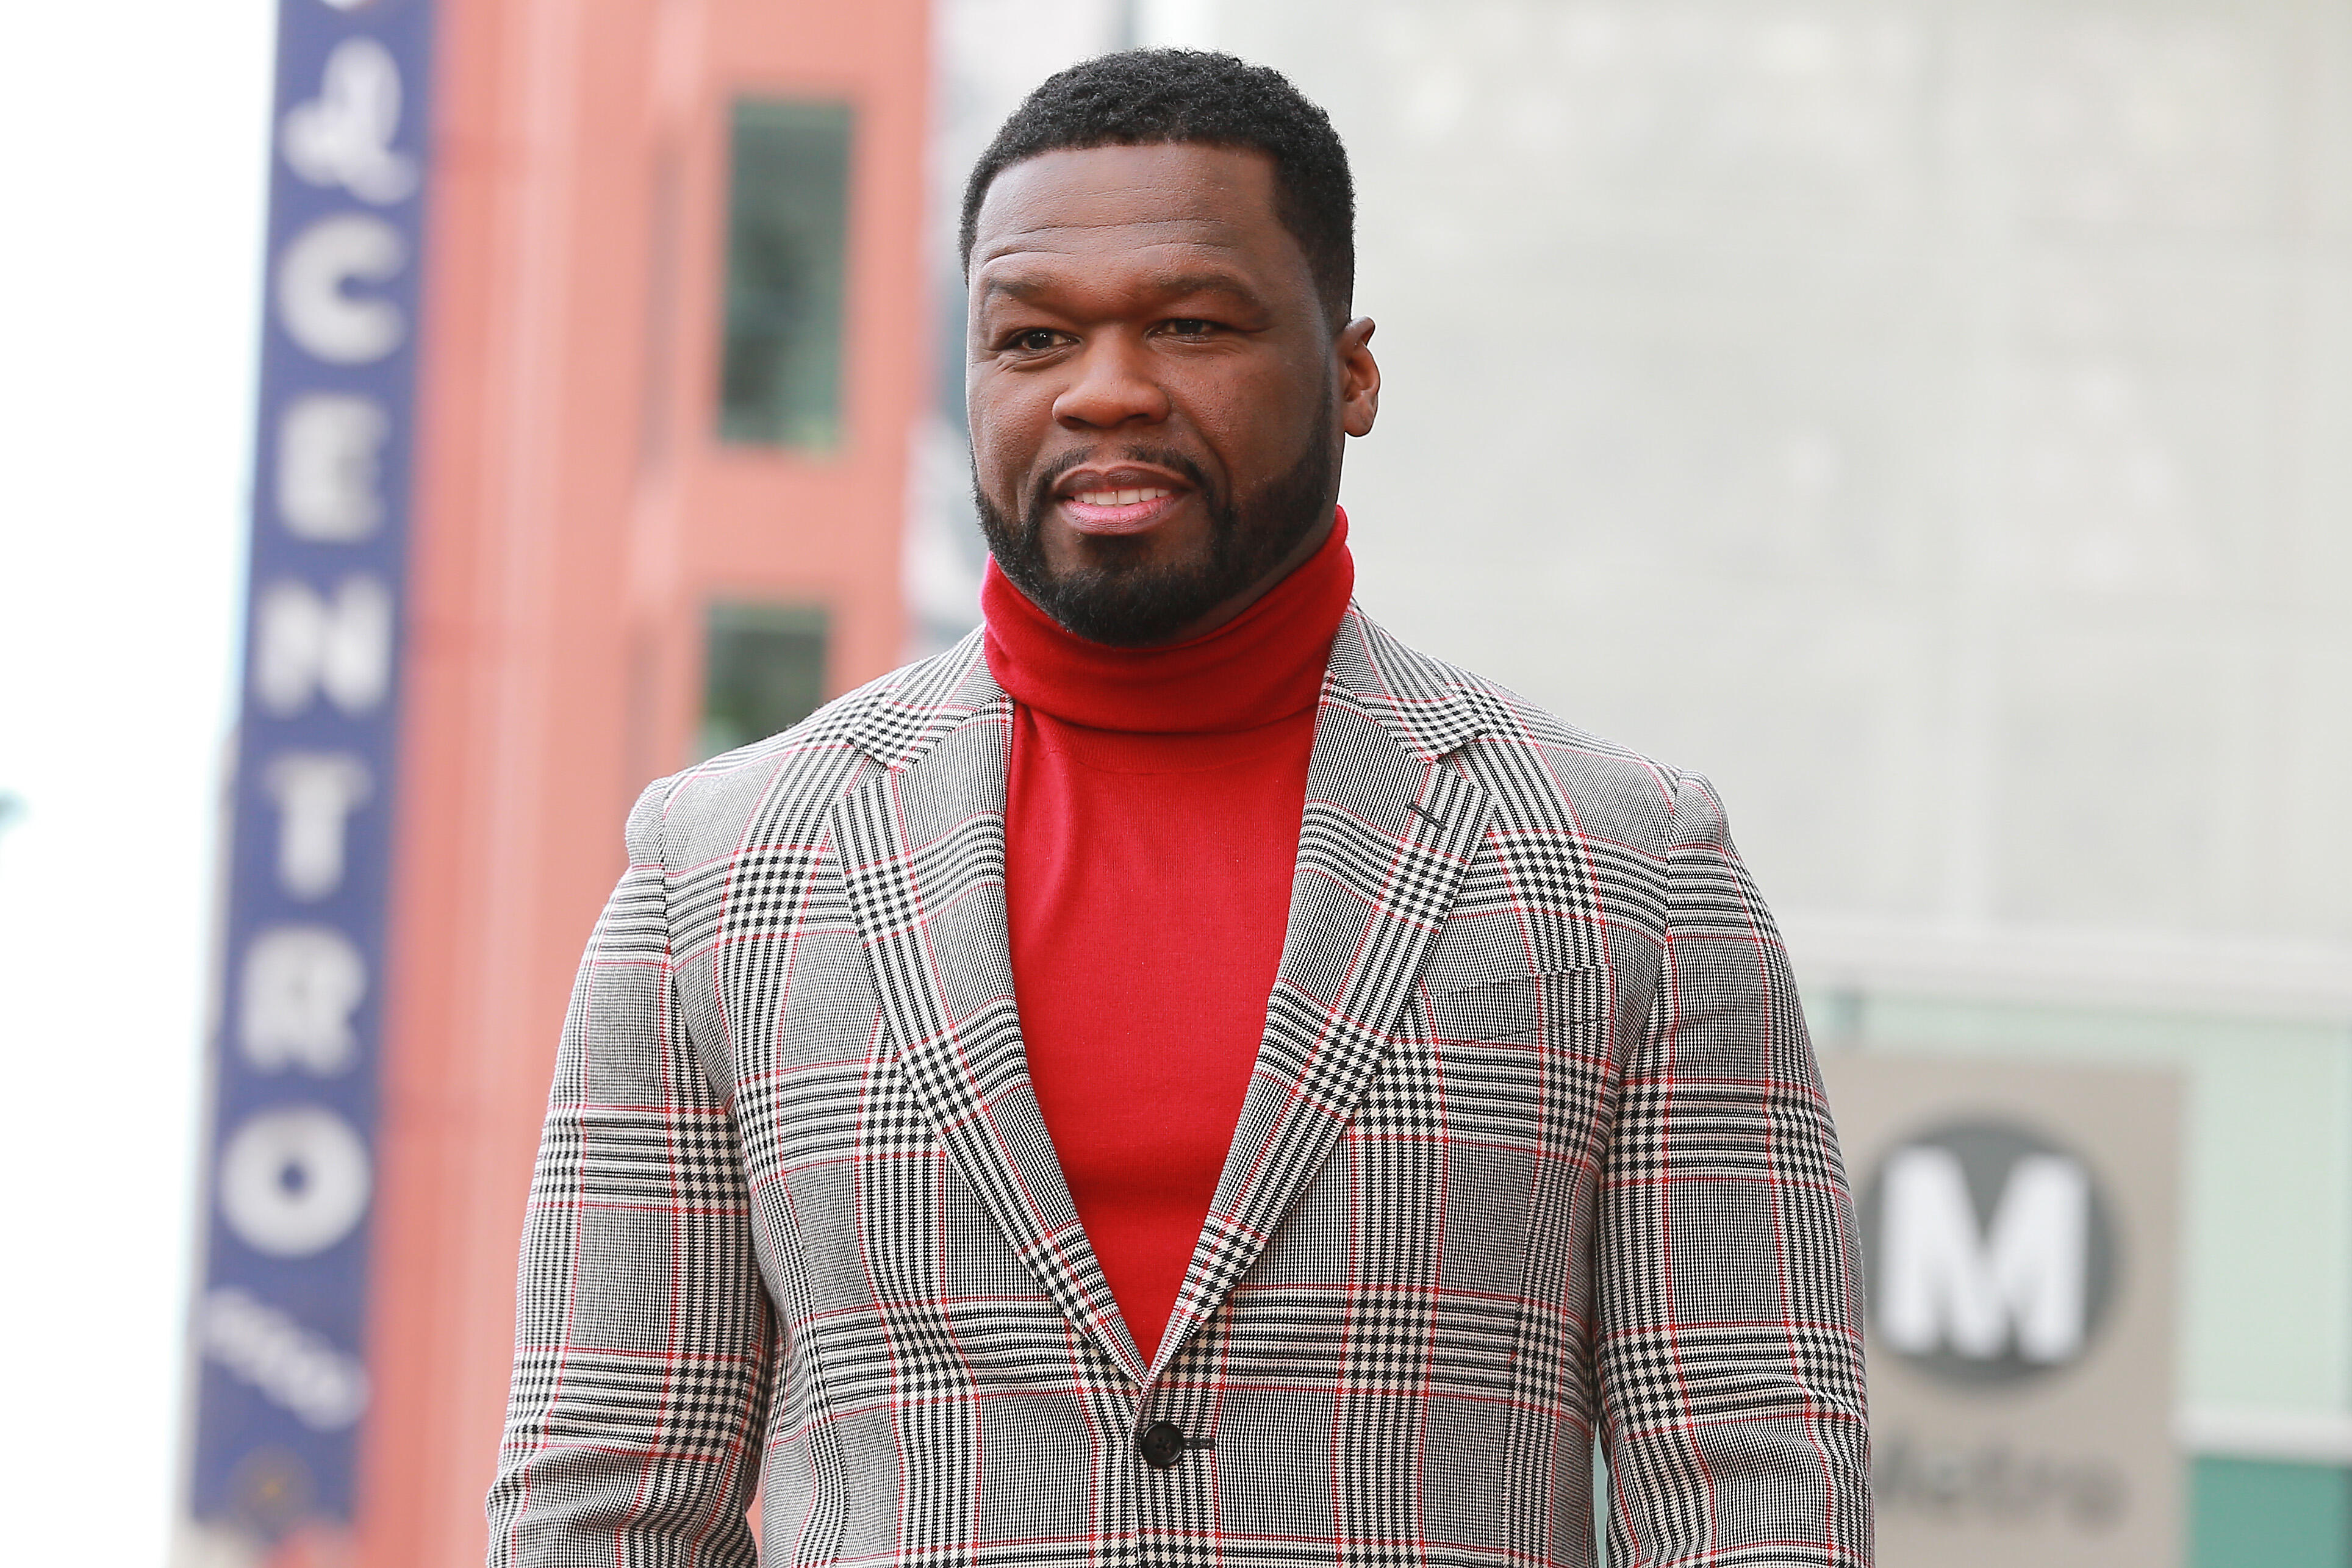 50 Cent in Iowa: Rapper meets fans at Ankeny Hy-Vee for bottle signing